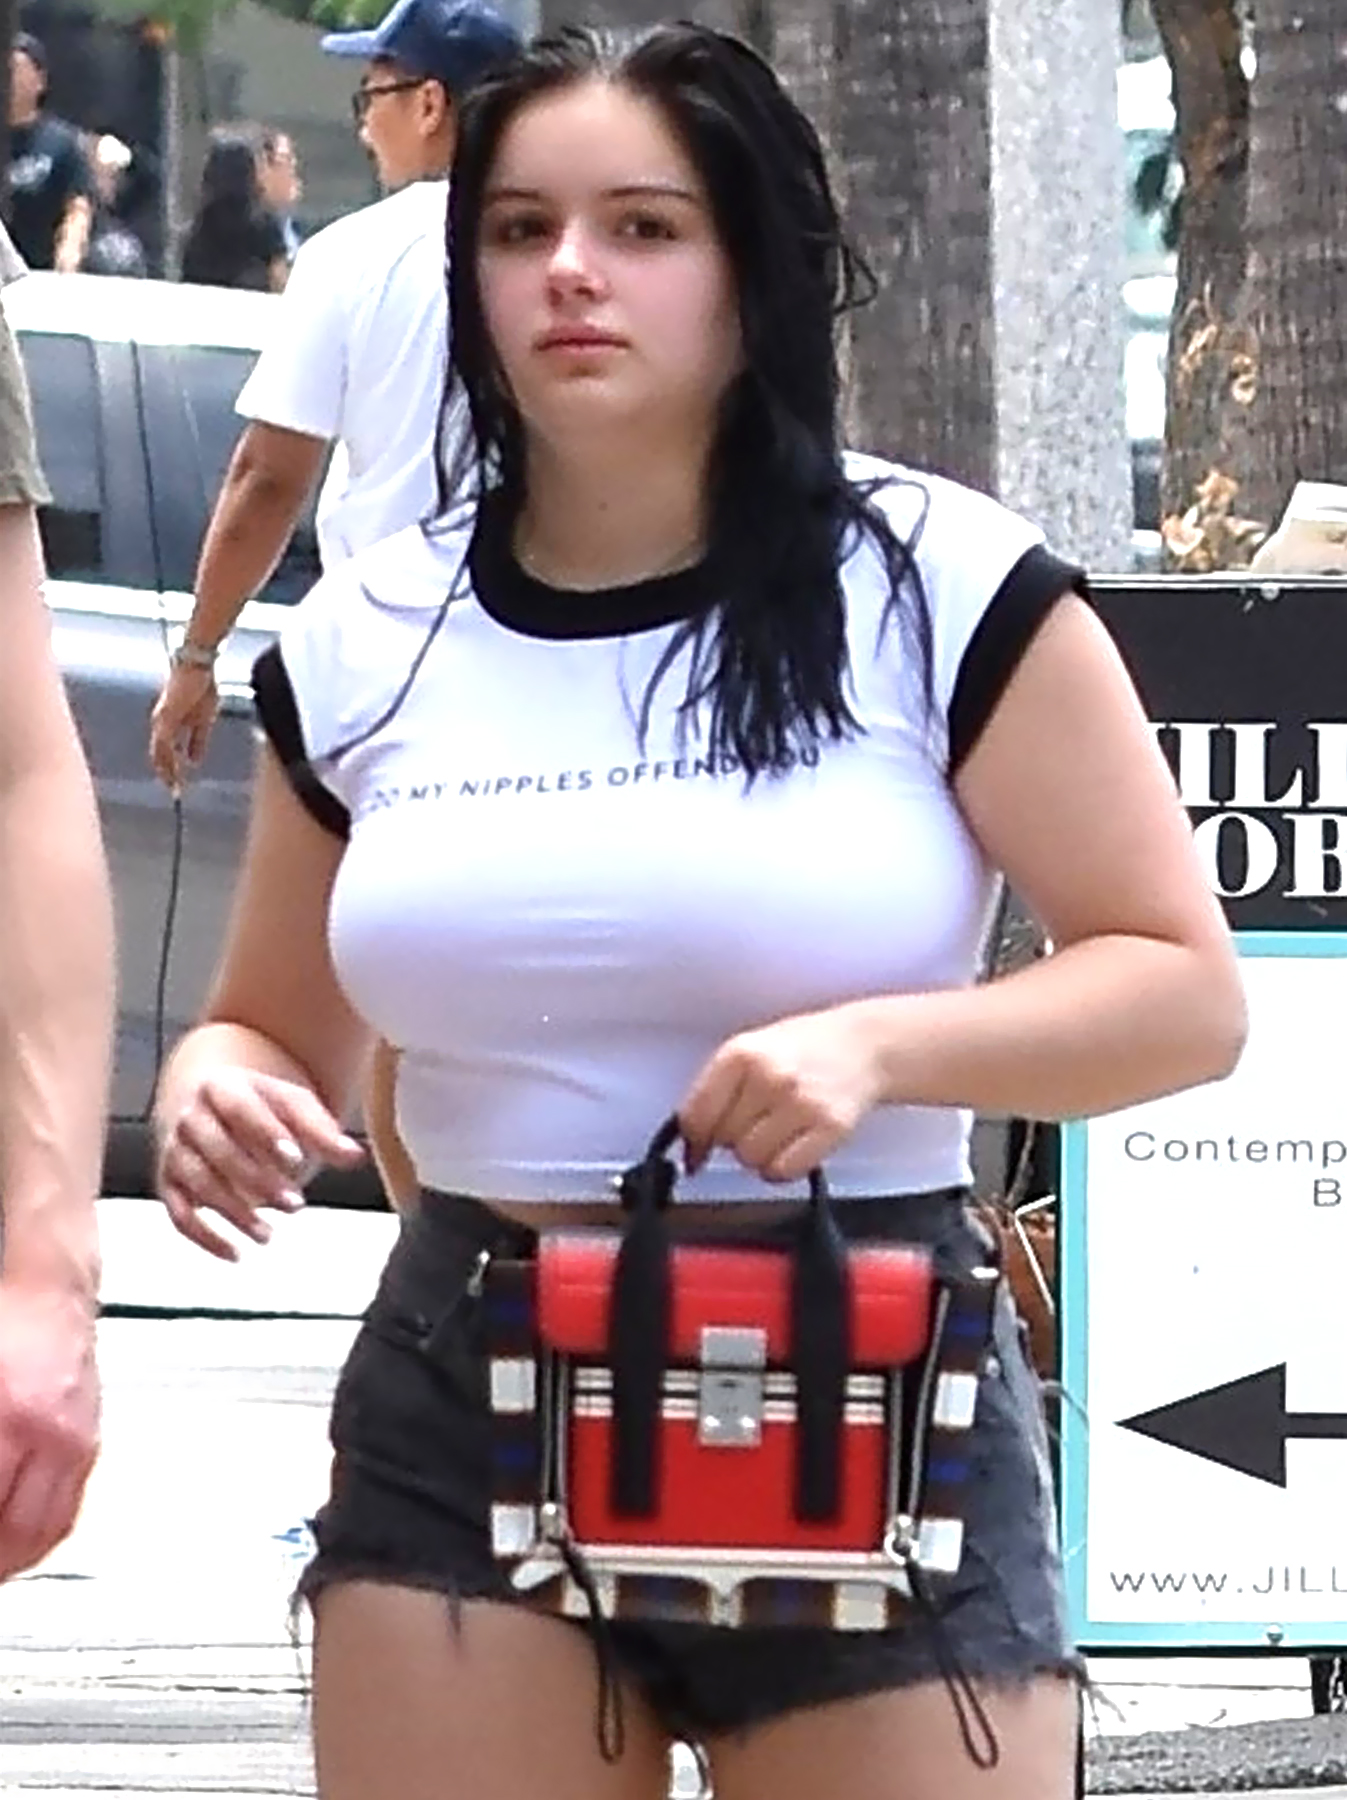 Ariel Winter's T-Shirt Trolls Her Haters: 'Do My Nipples Offend